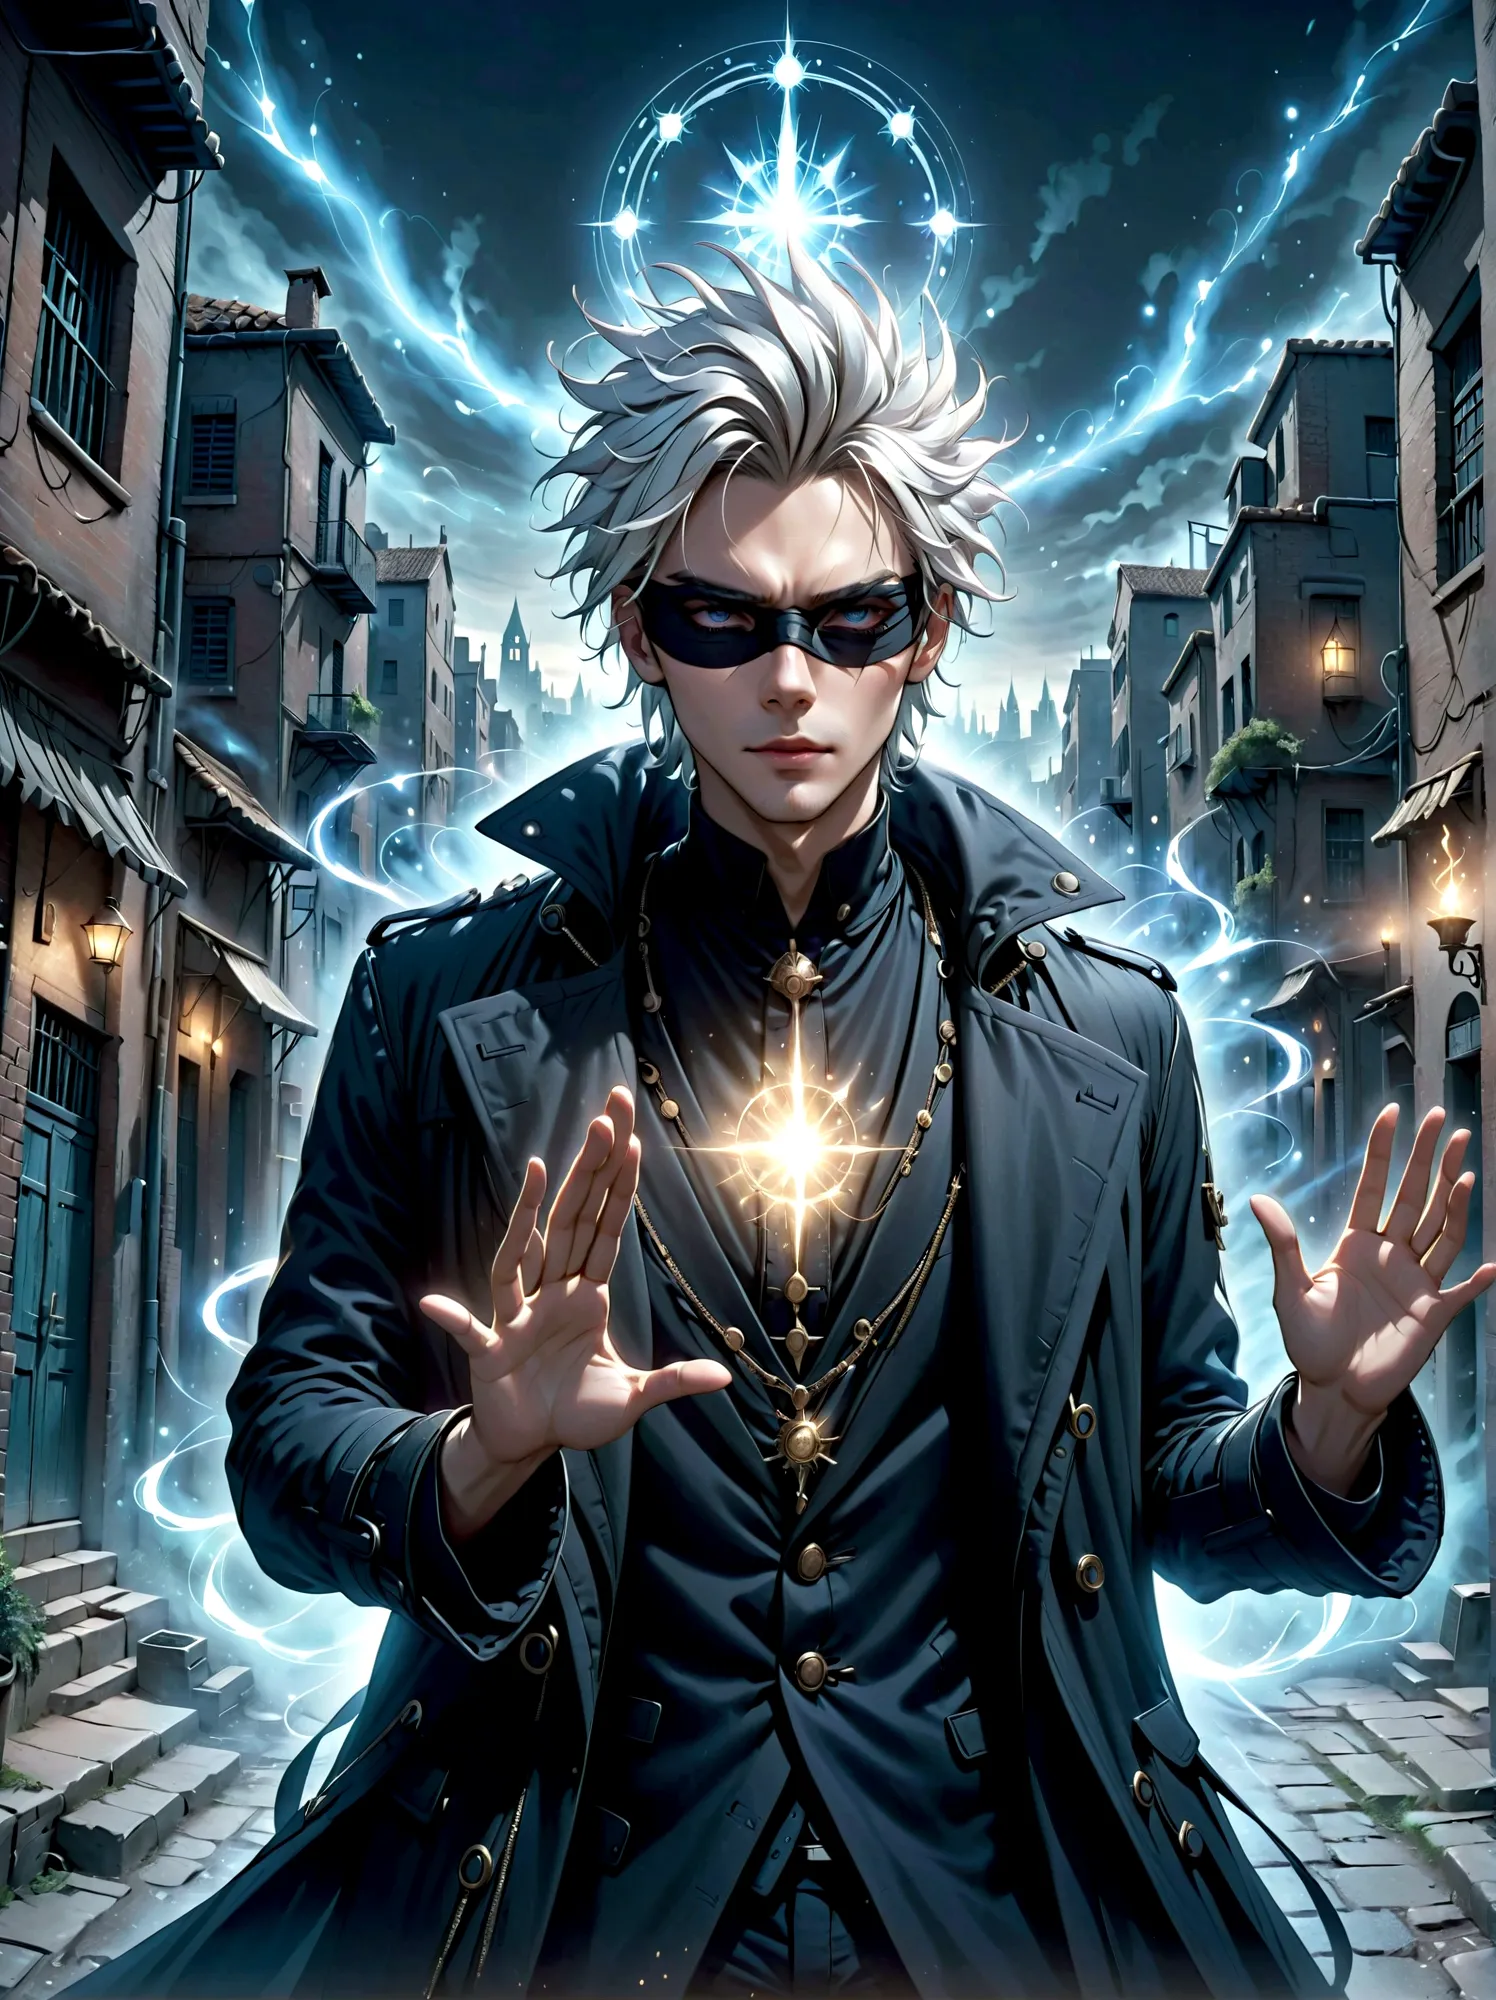 A tall individual with striking white spiky hair, dressed in a black coat. Their eyes are obscured by a blindfold, yet they radi...